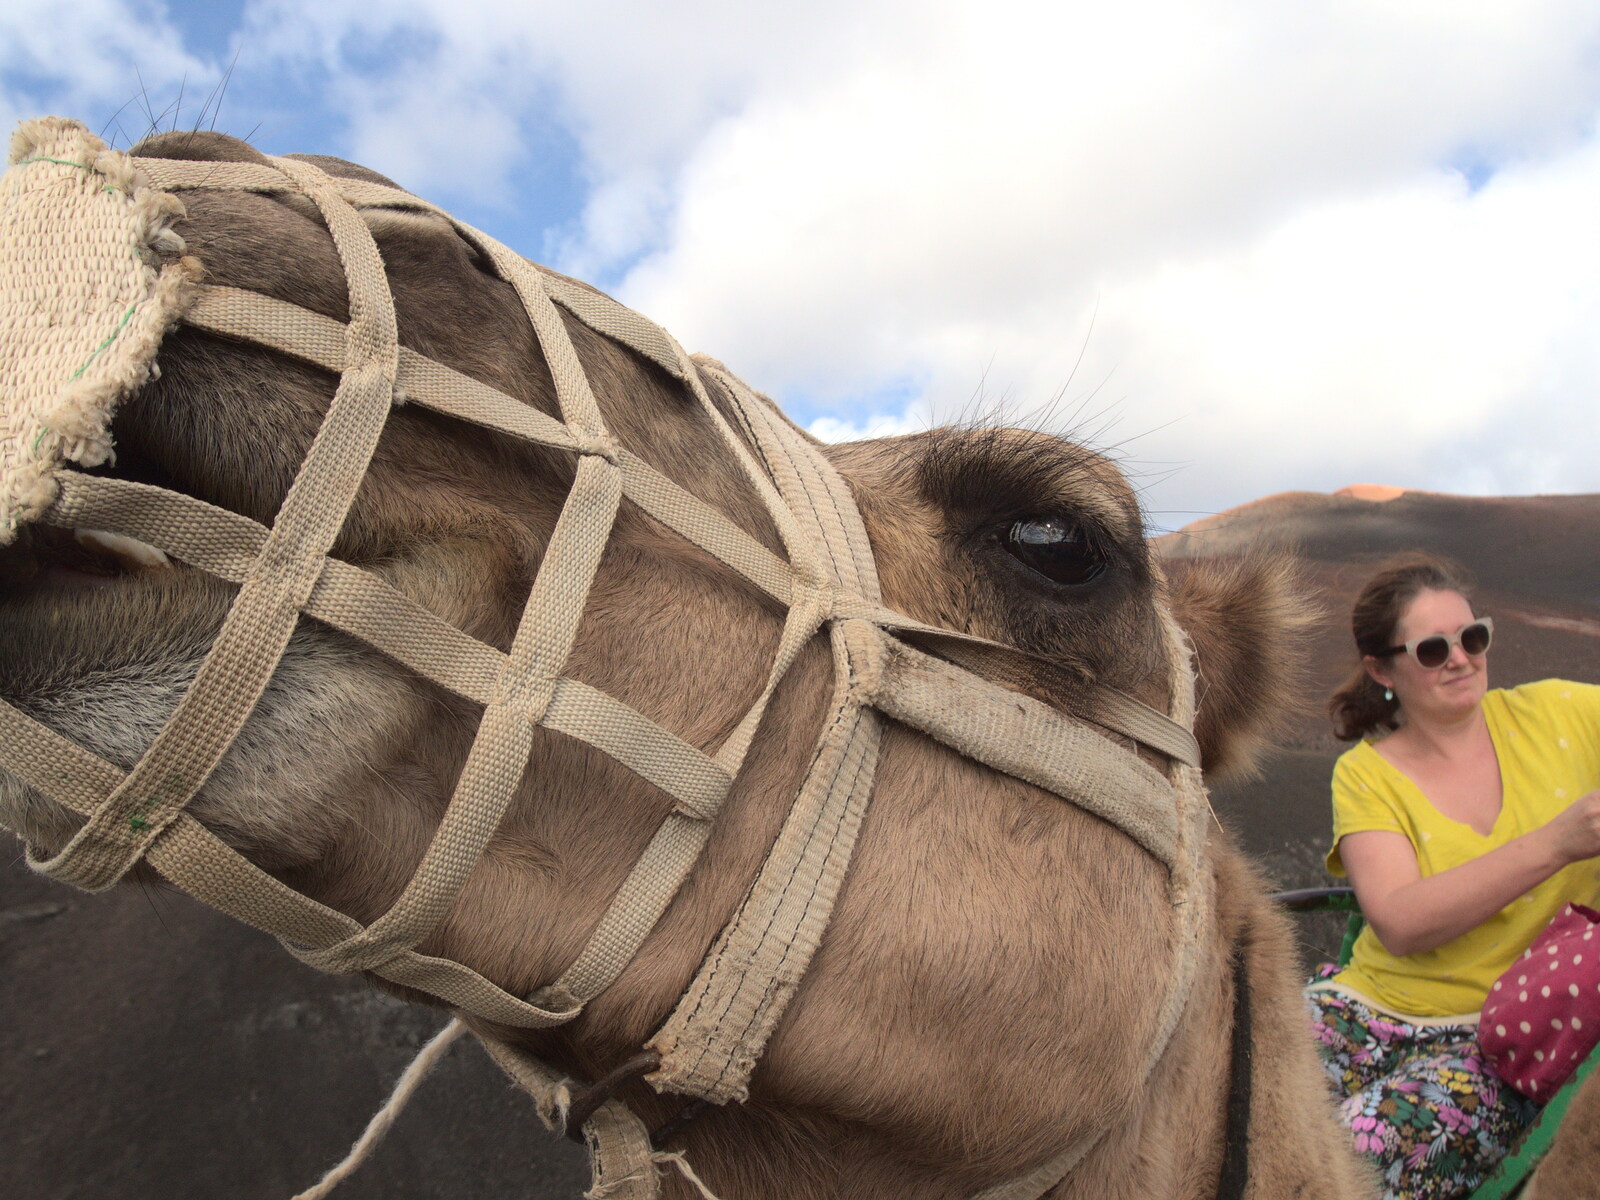 Fred's close-up of a camel from The Volcanoes of Lanzarote, Canary Islands, Spain - 27th October 2021